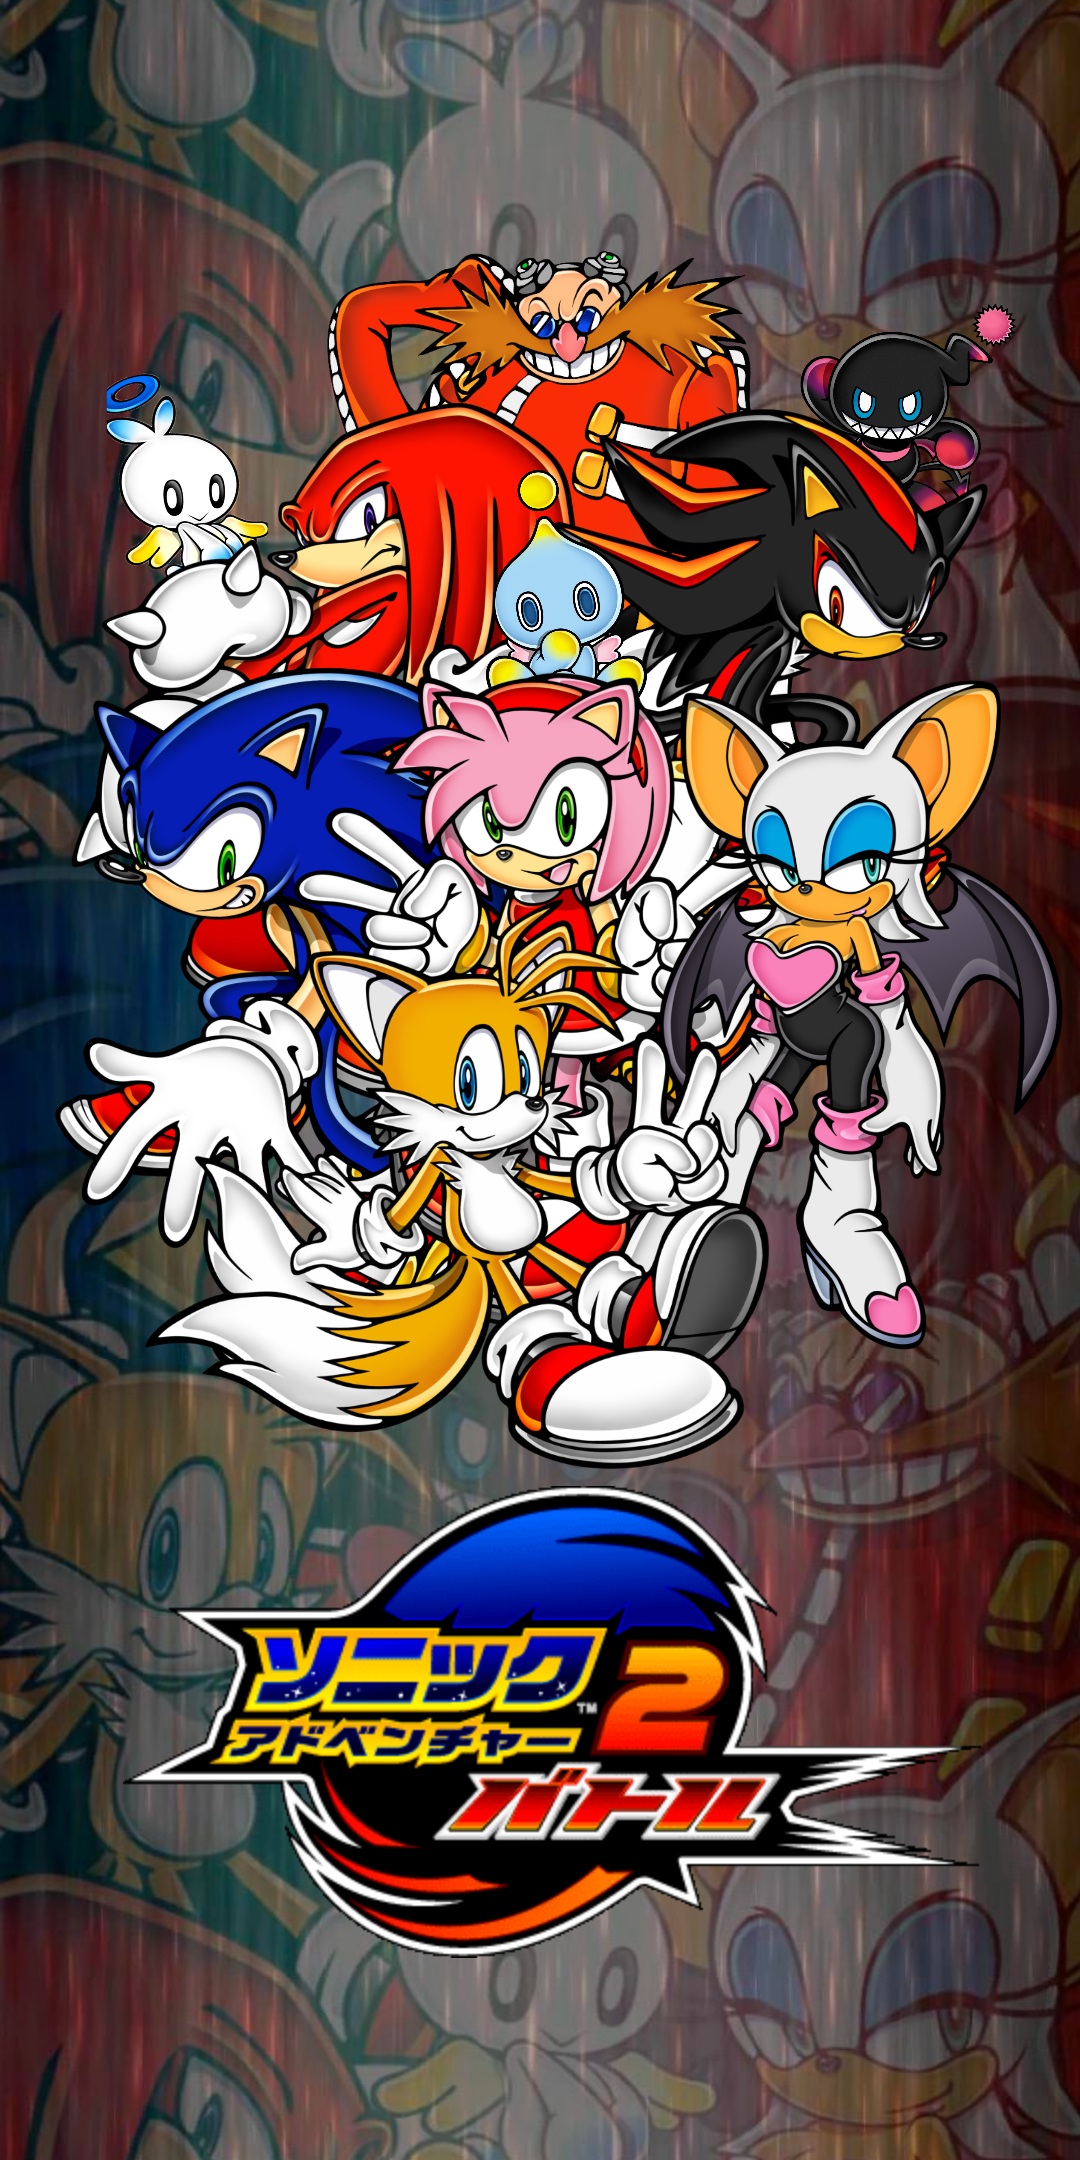 1080x2160 An Adventure 2 phone wallpaper I made up if anyone fancies it (with English/Japanese logos variants because why not) : r/SonicTheHedgehog